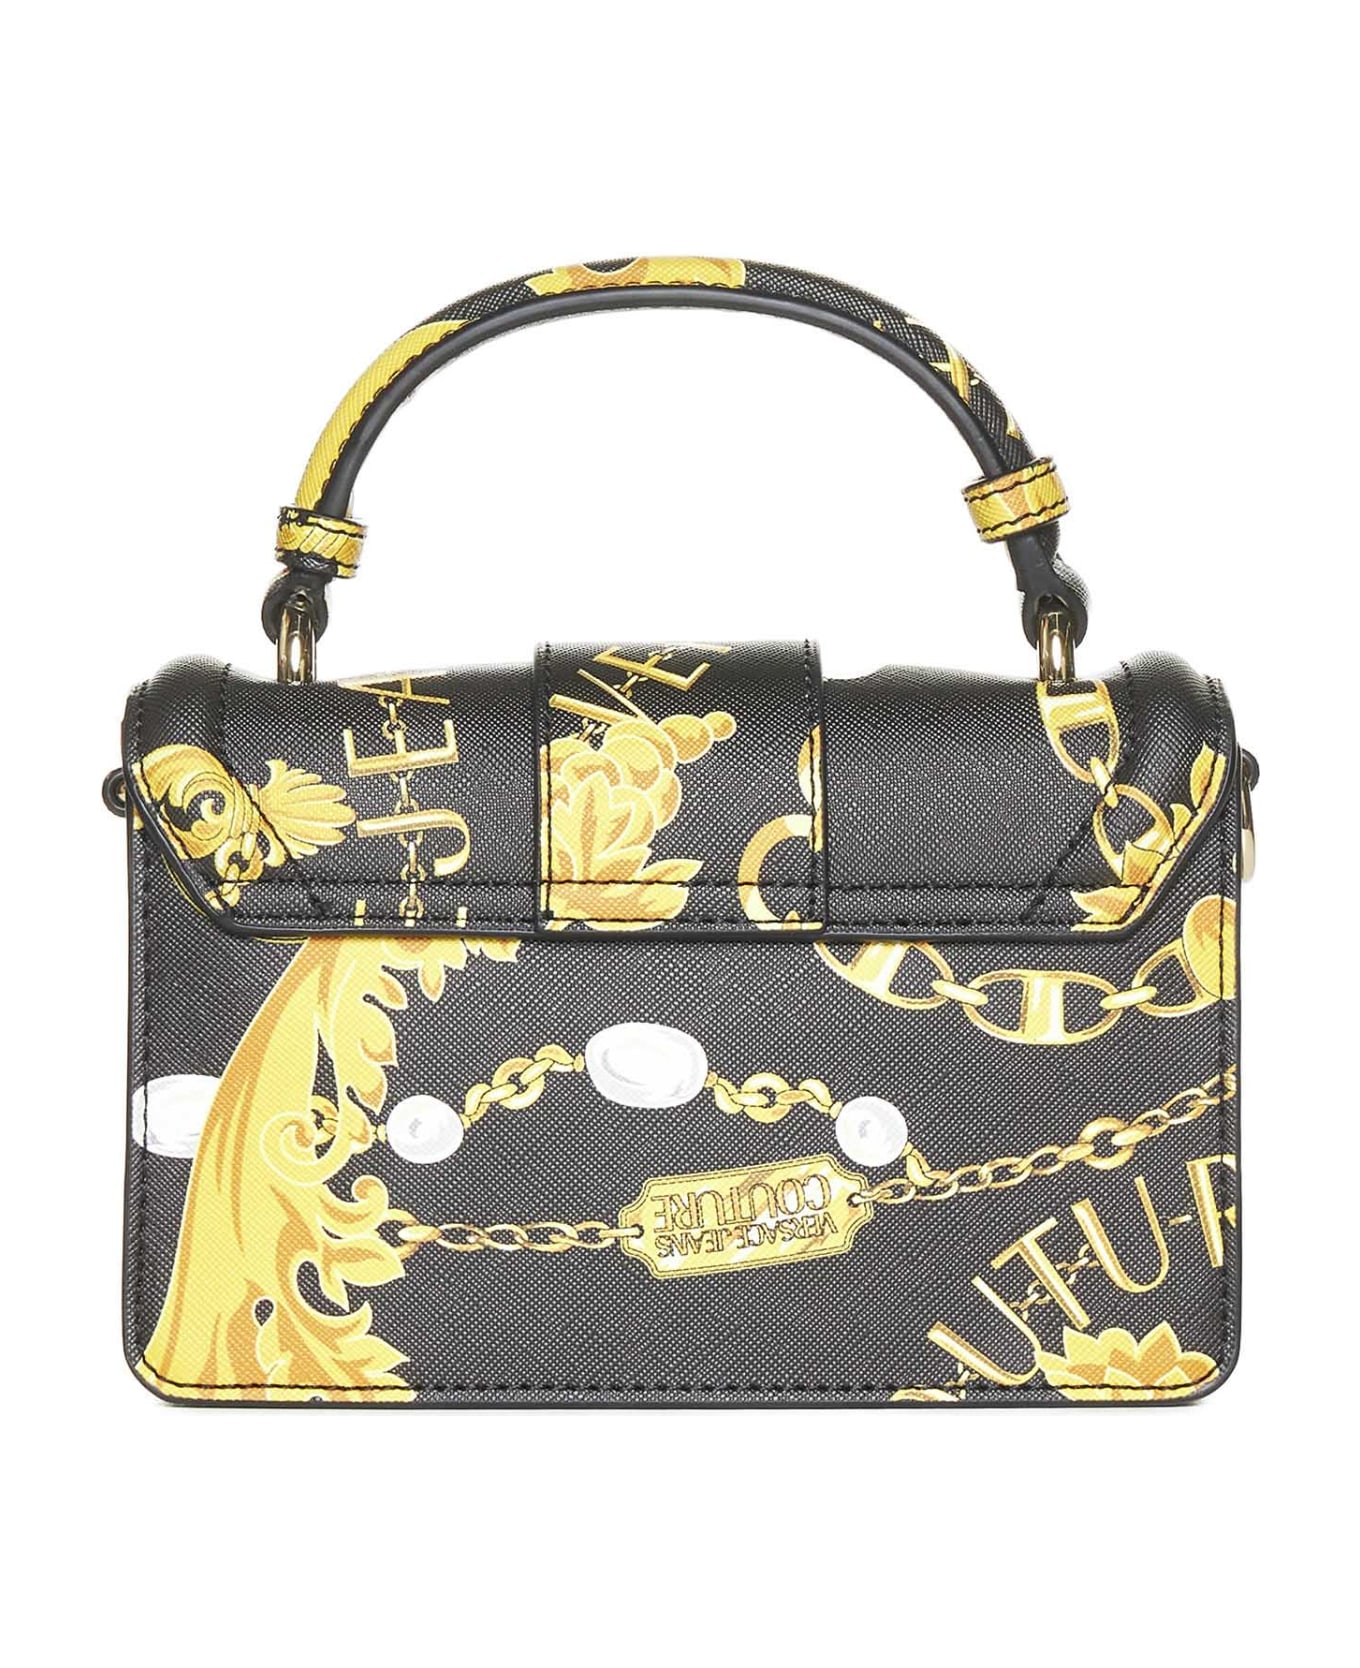 Versace Jeans Couture Chain Couture Handbag - Black gold